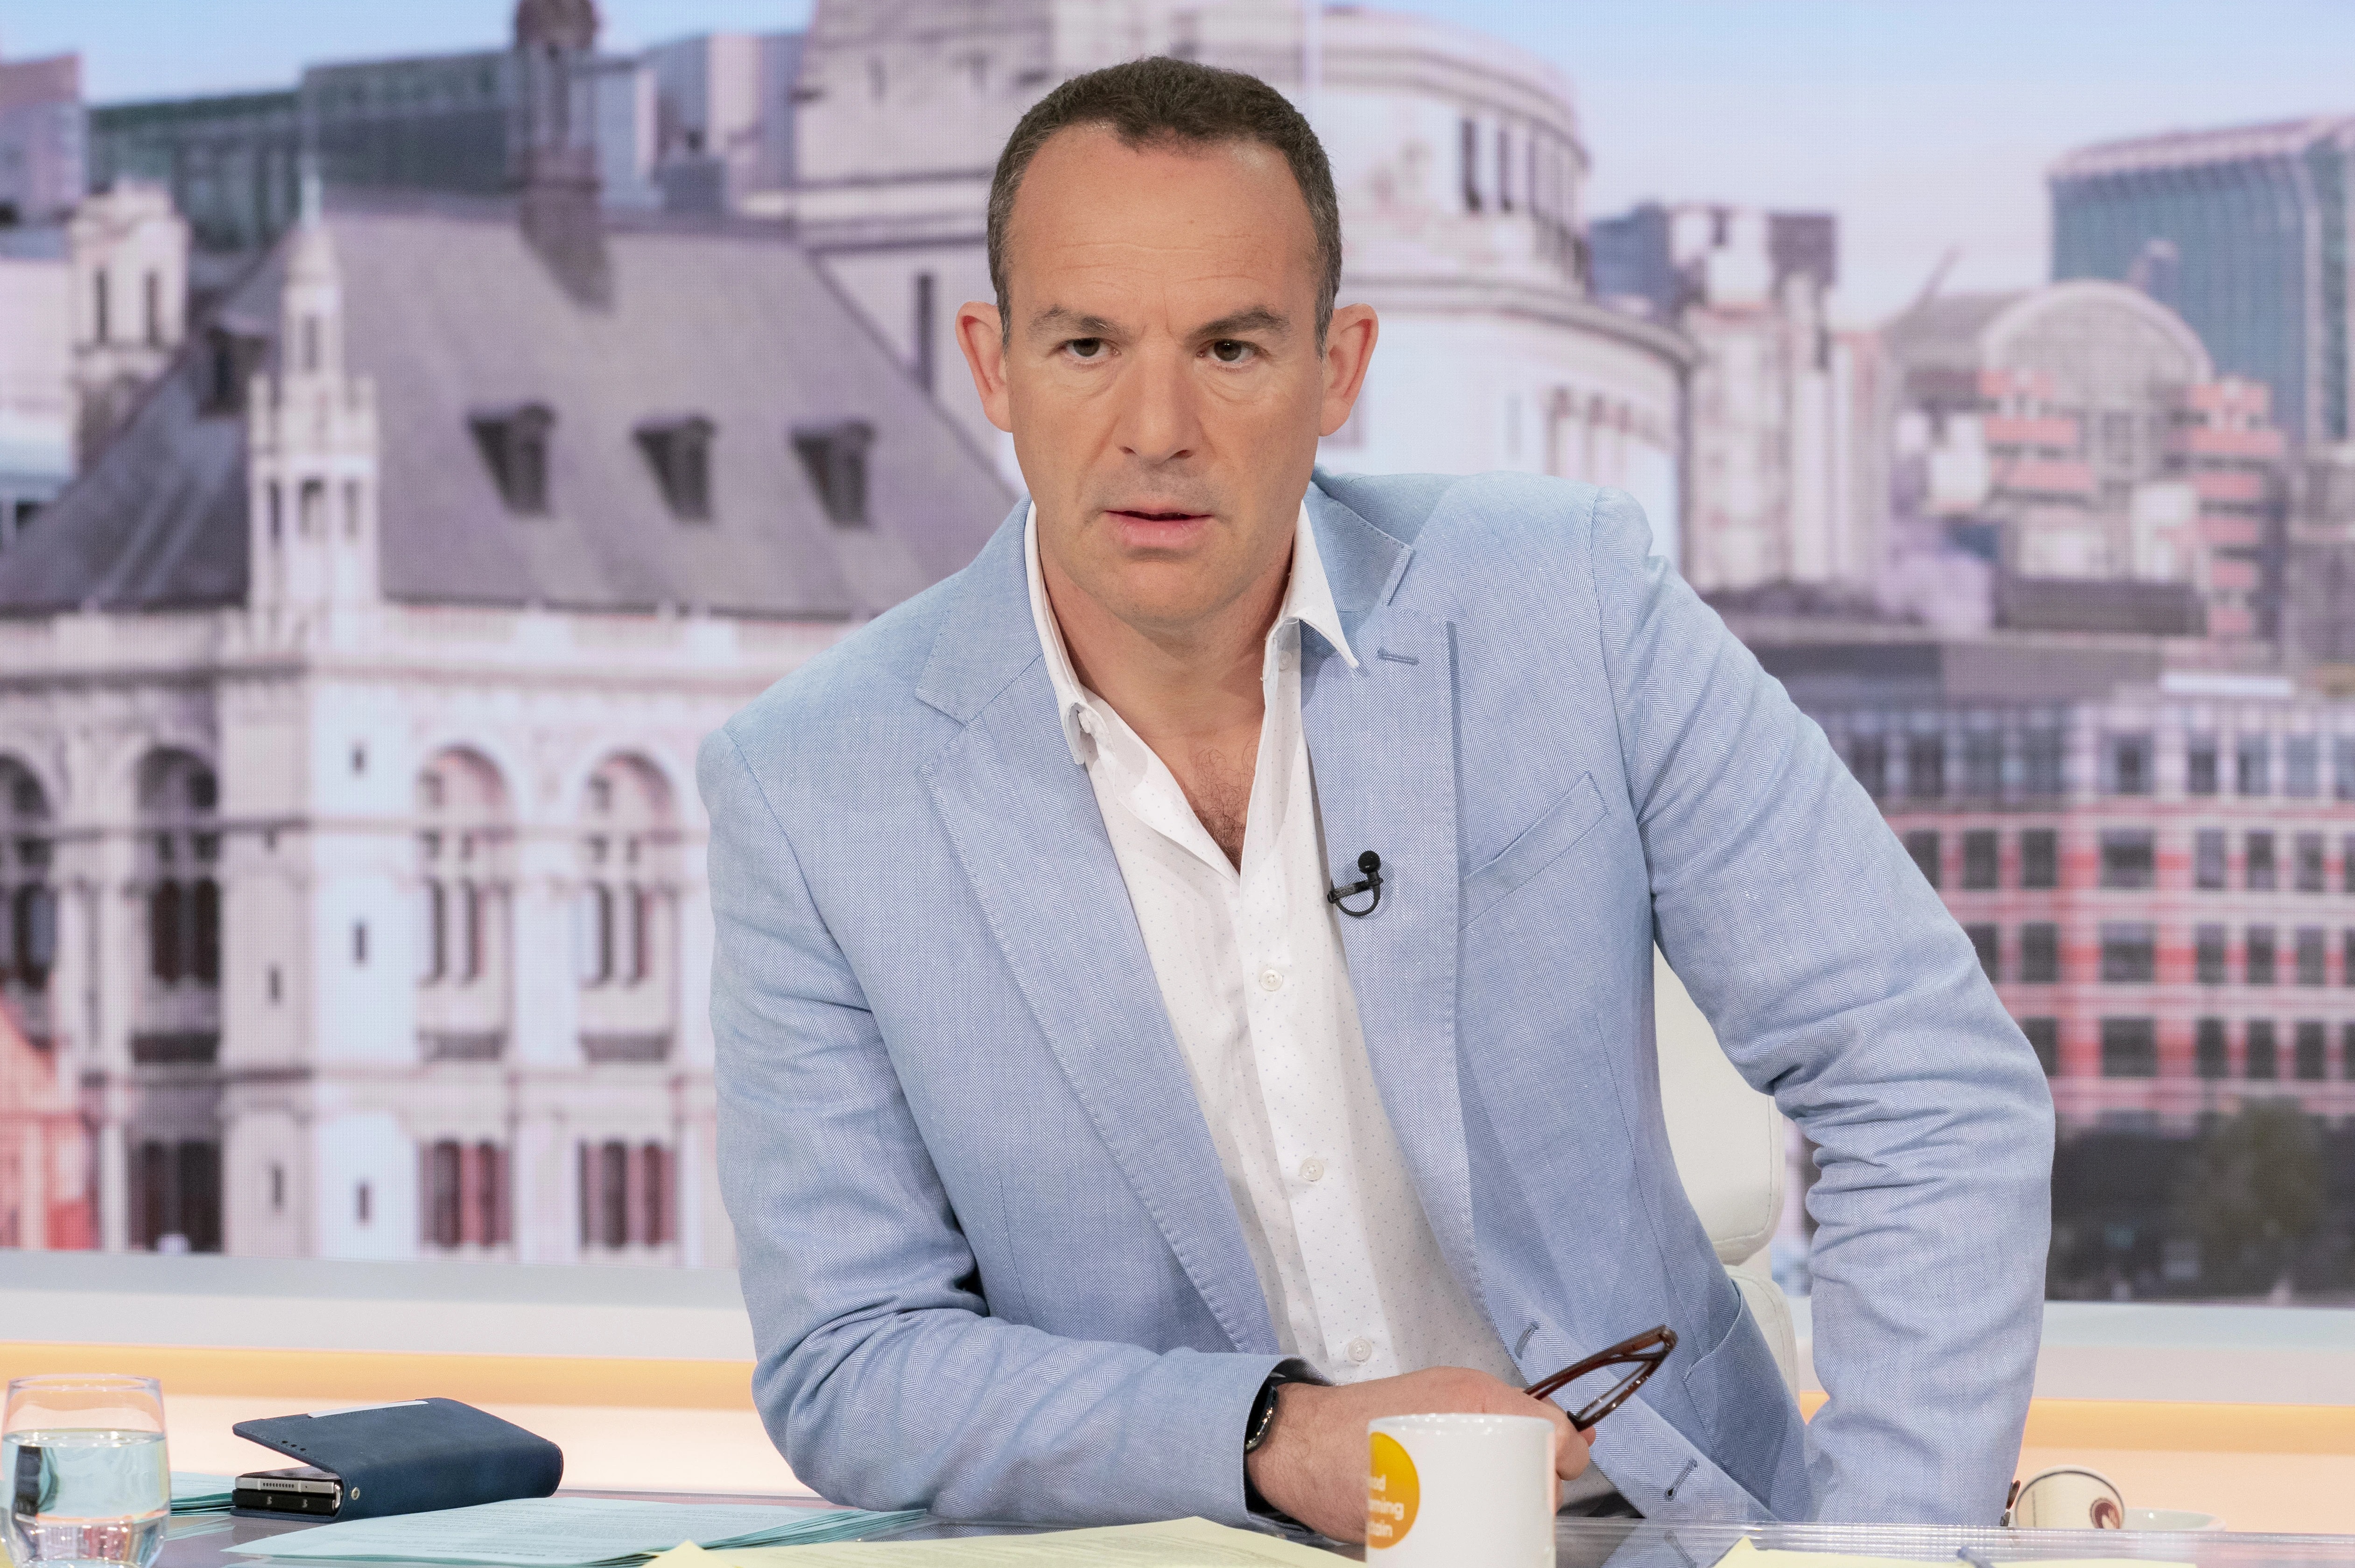 Martin Lewis reveals way to calculate running cost of household appliances